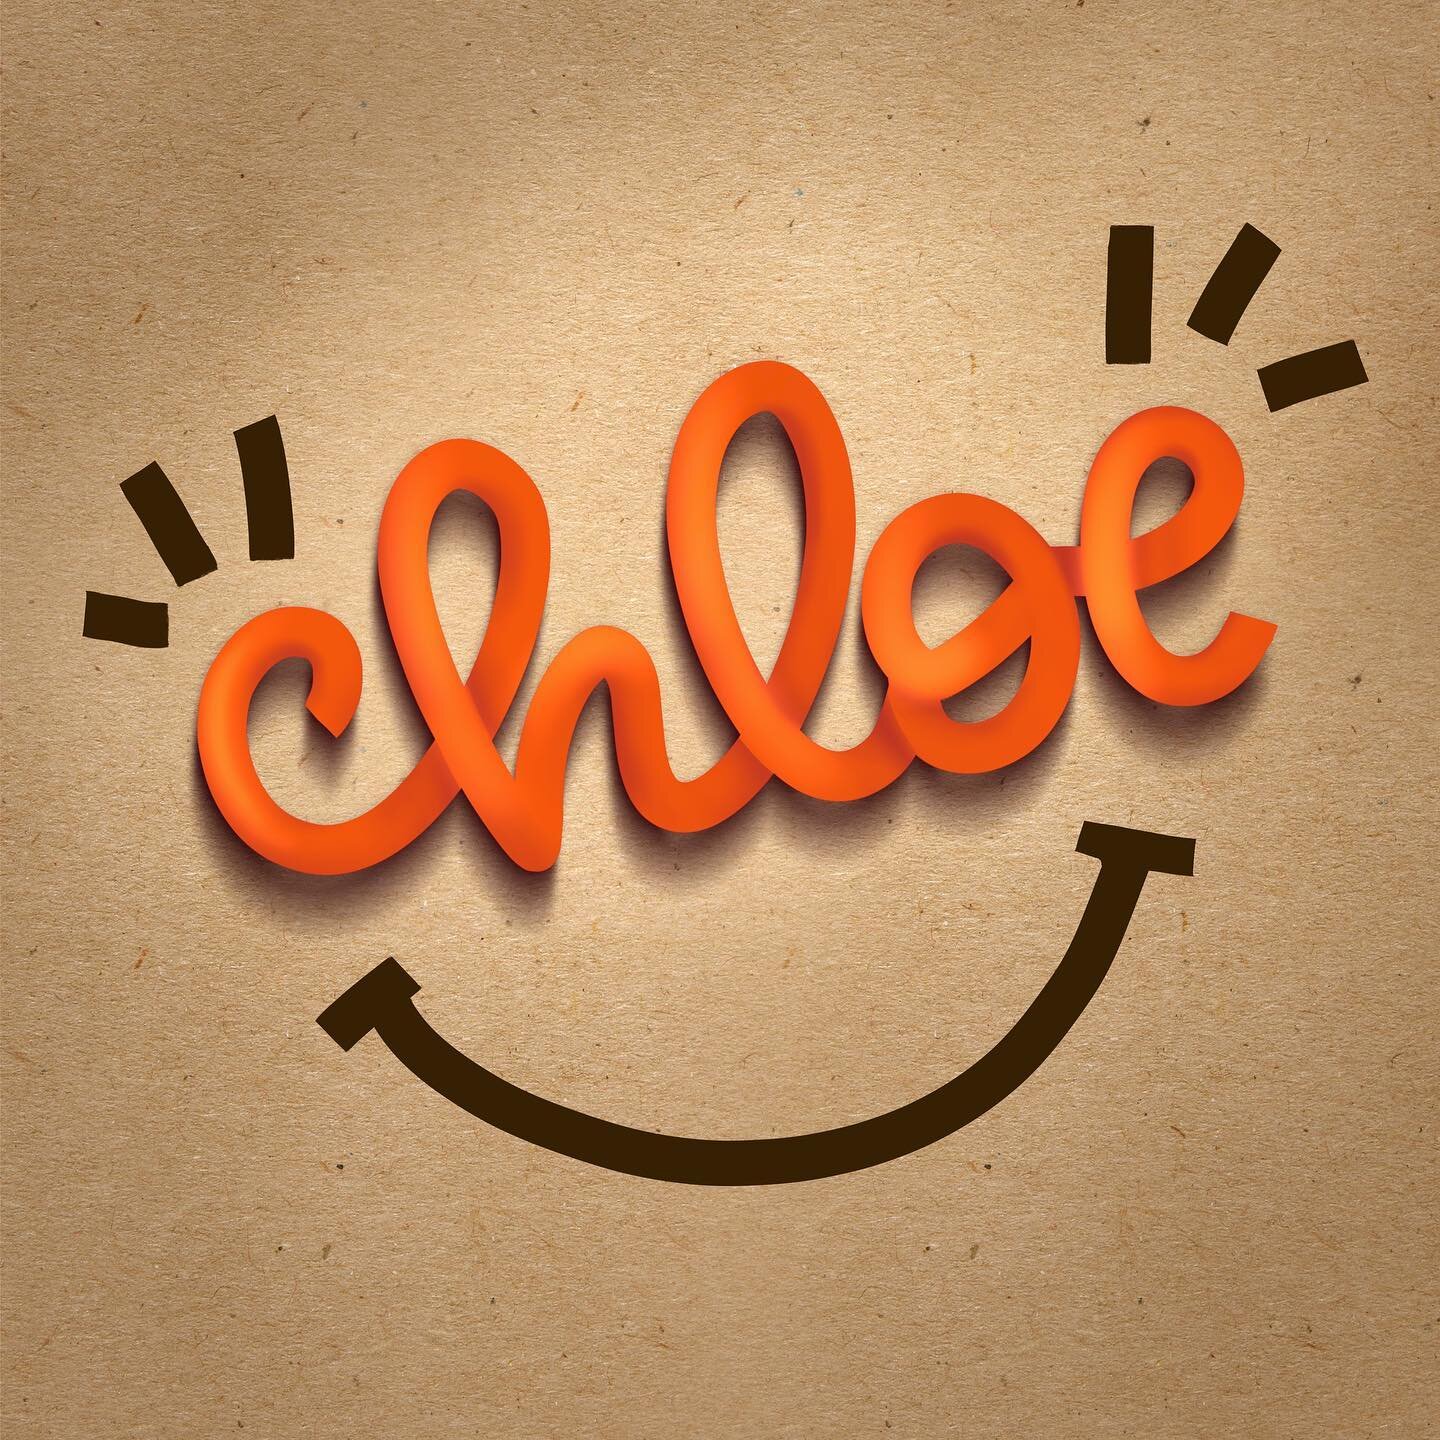 I know a cute little girl with this name. #chloe #ipadprocreatelettering #procreatelettering #handlettering #letteringpractice #letteringbeginner #cutelettering